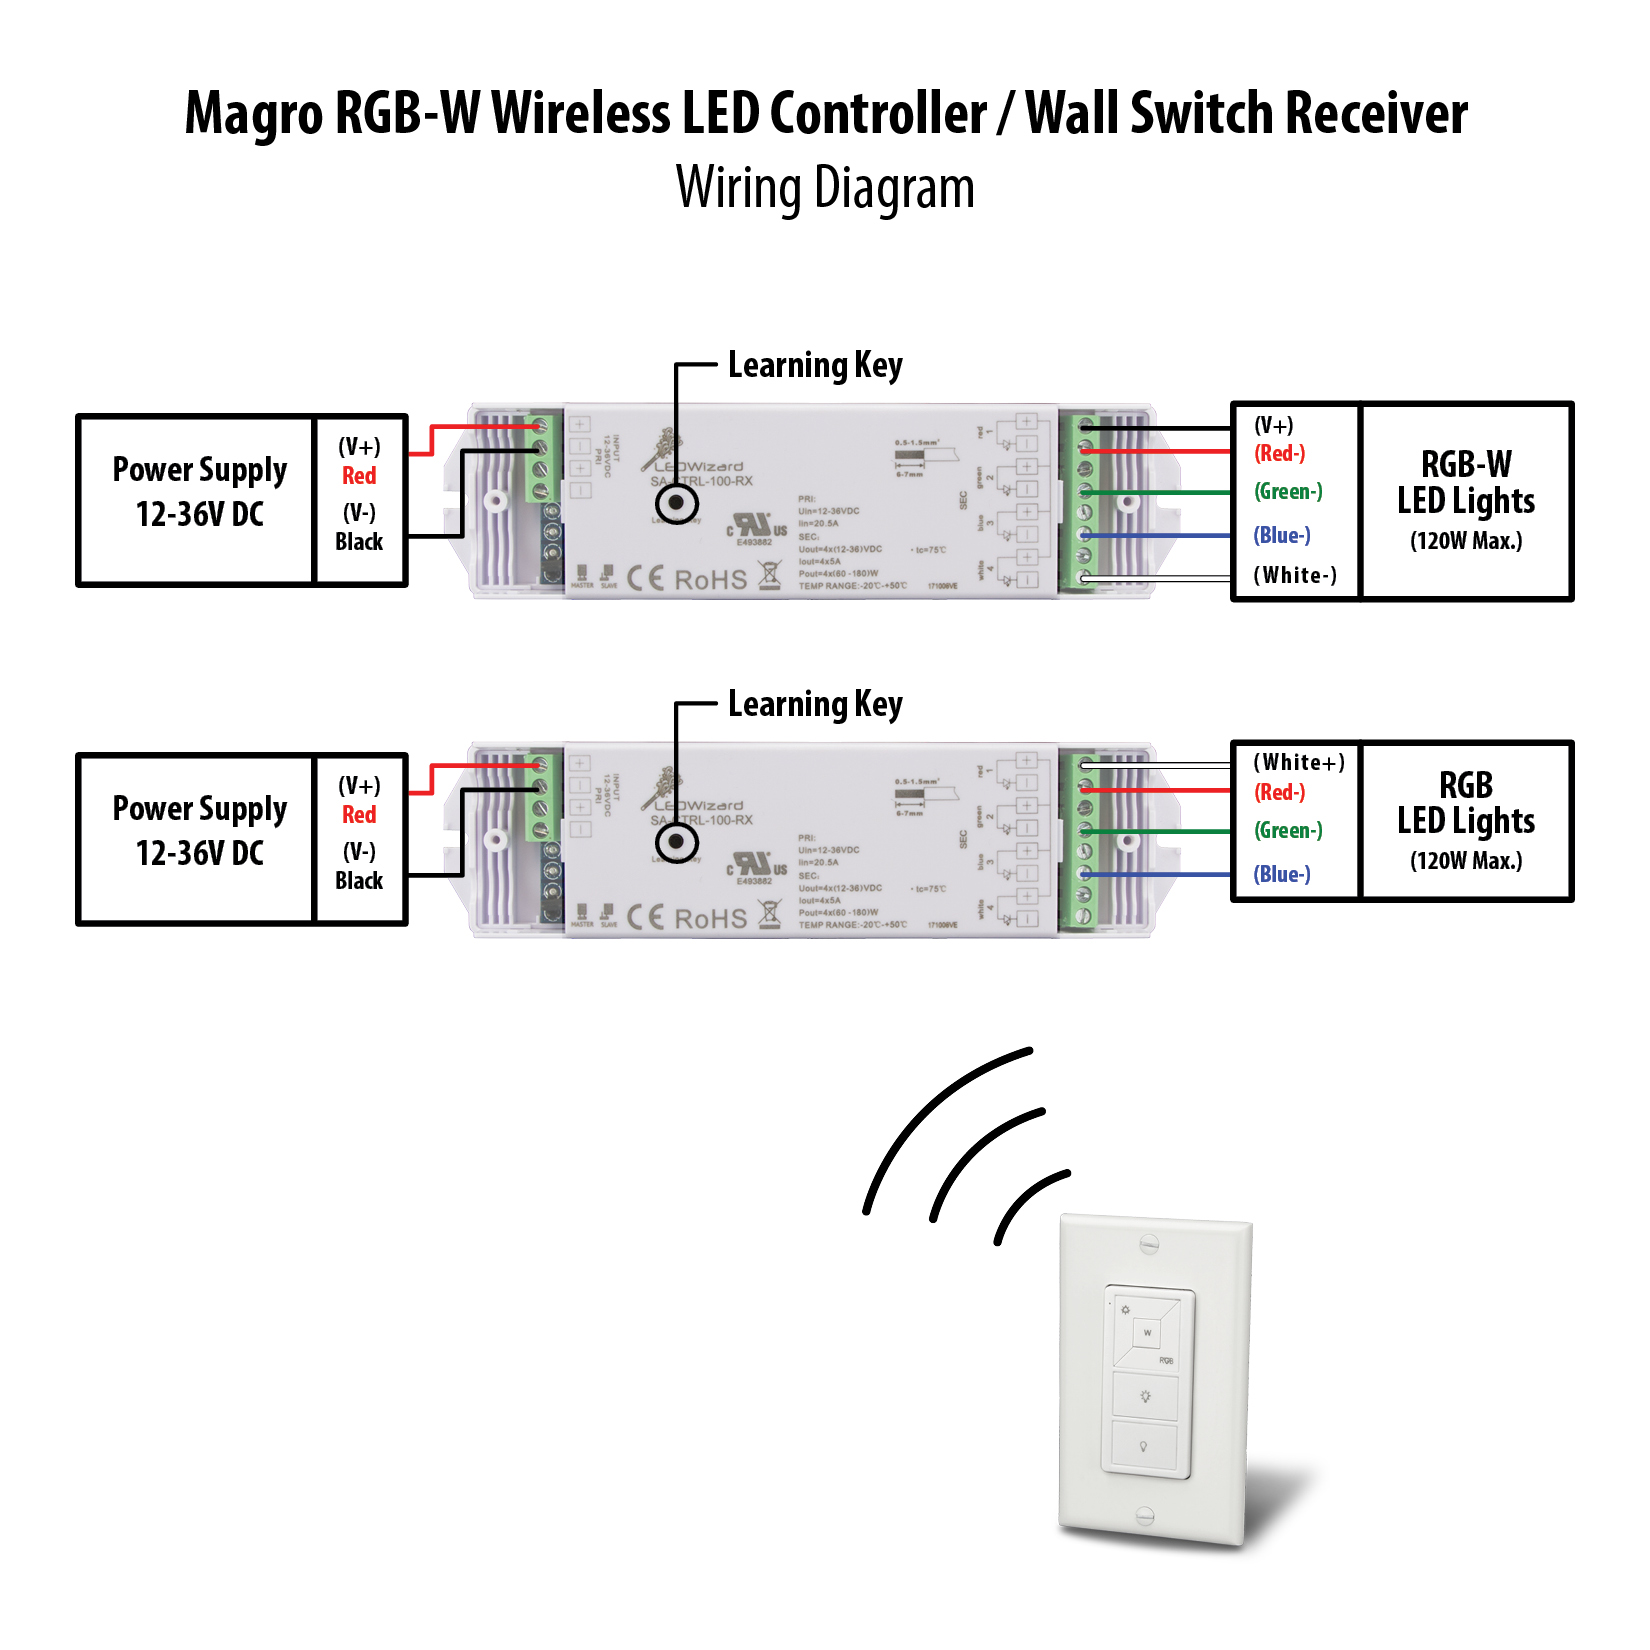 https://www.solidapollo.com/images/tab/RGB-Magro-Switch-Diagram.jpg